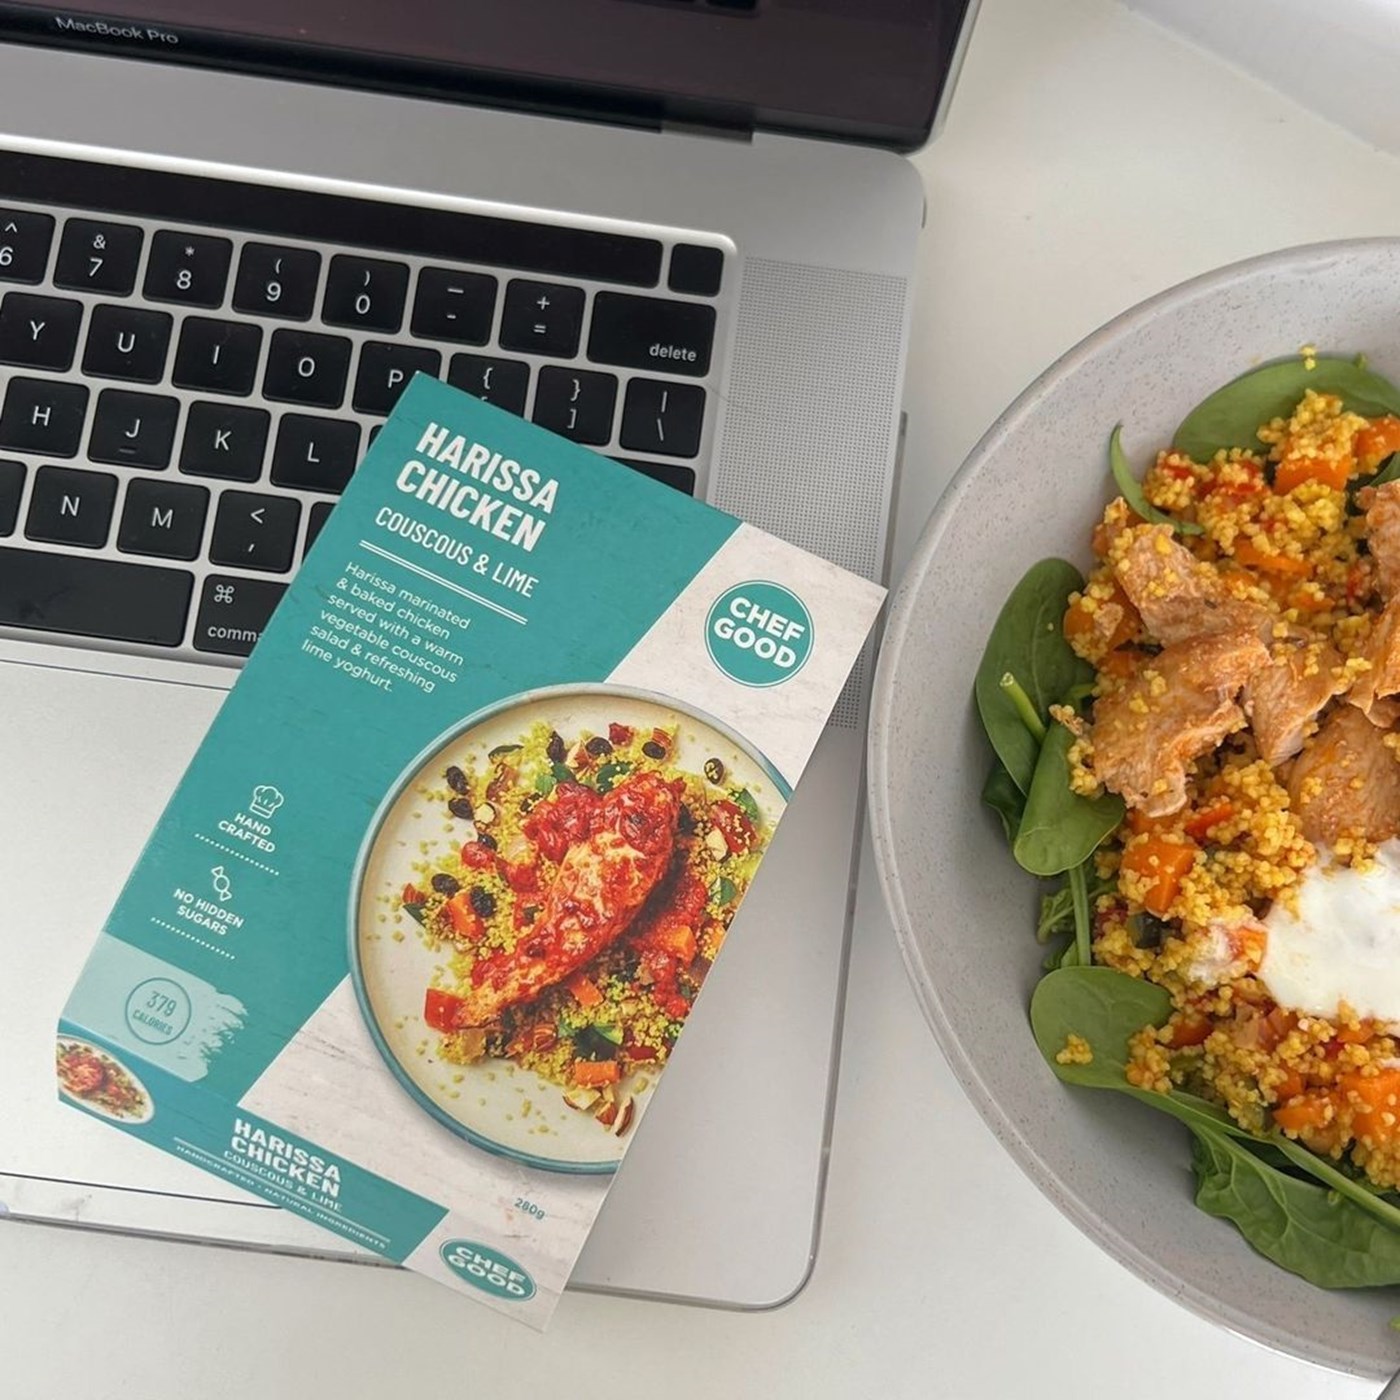 A ready-made meal of harissa chicken, sitting on a laptop, by Chefgood.